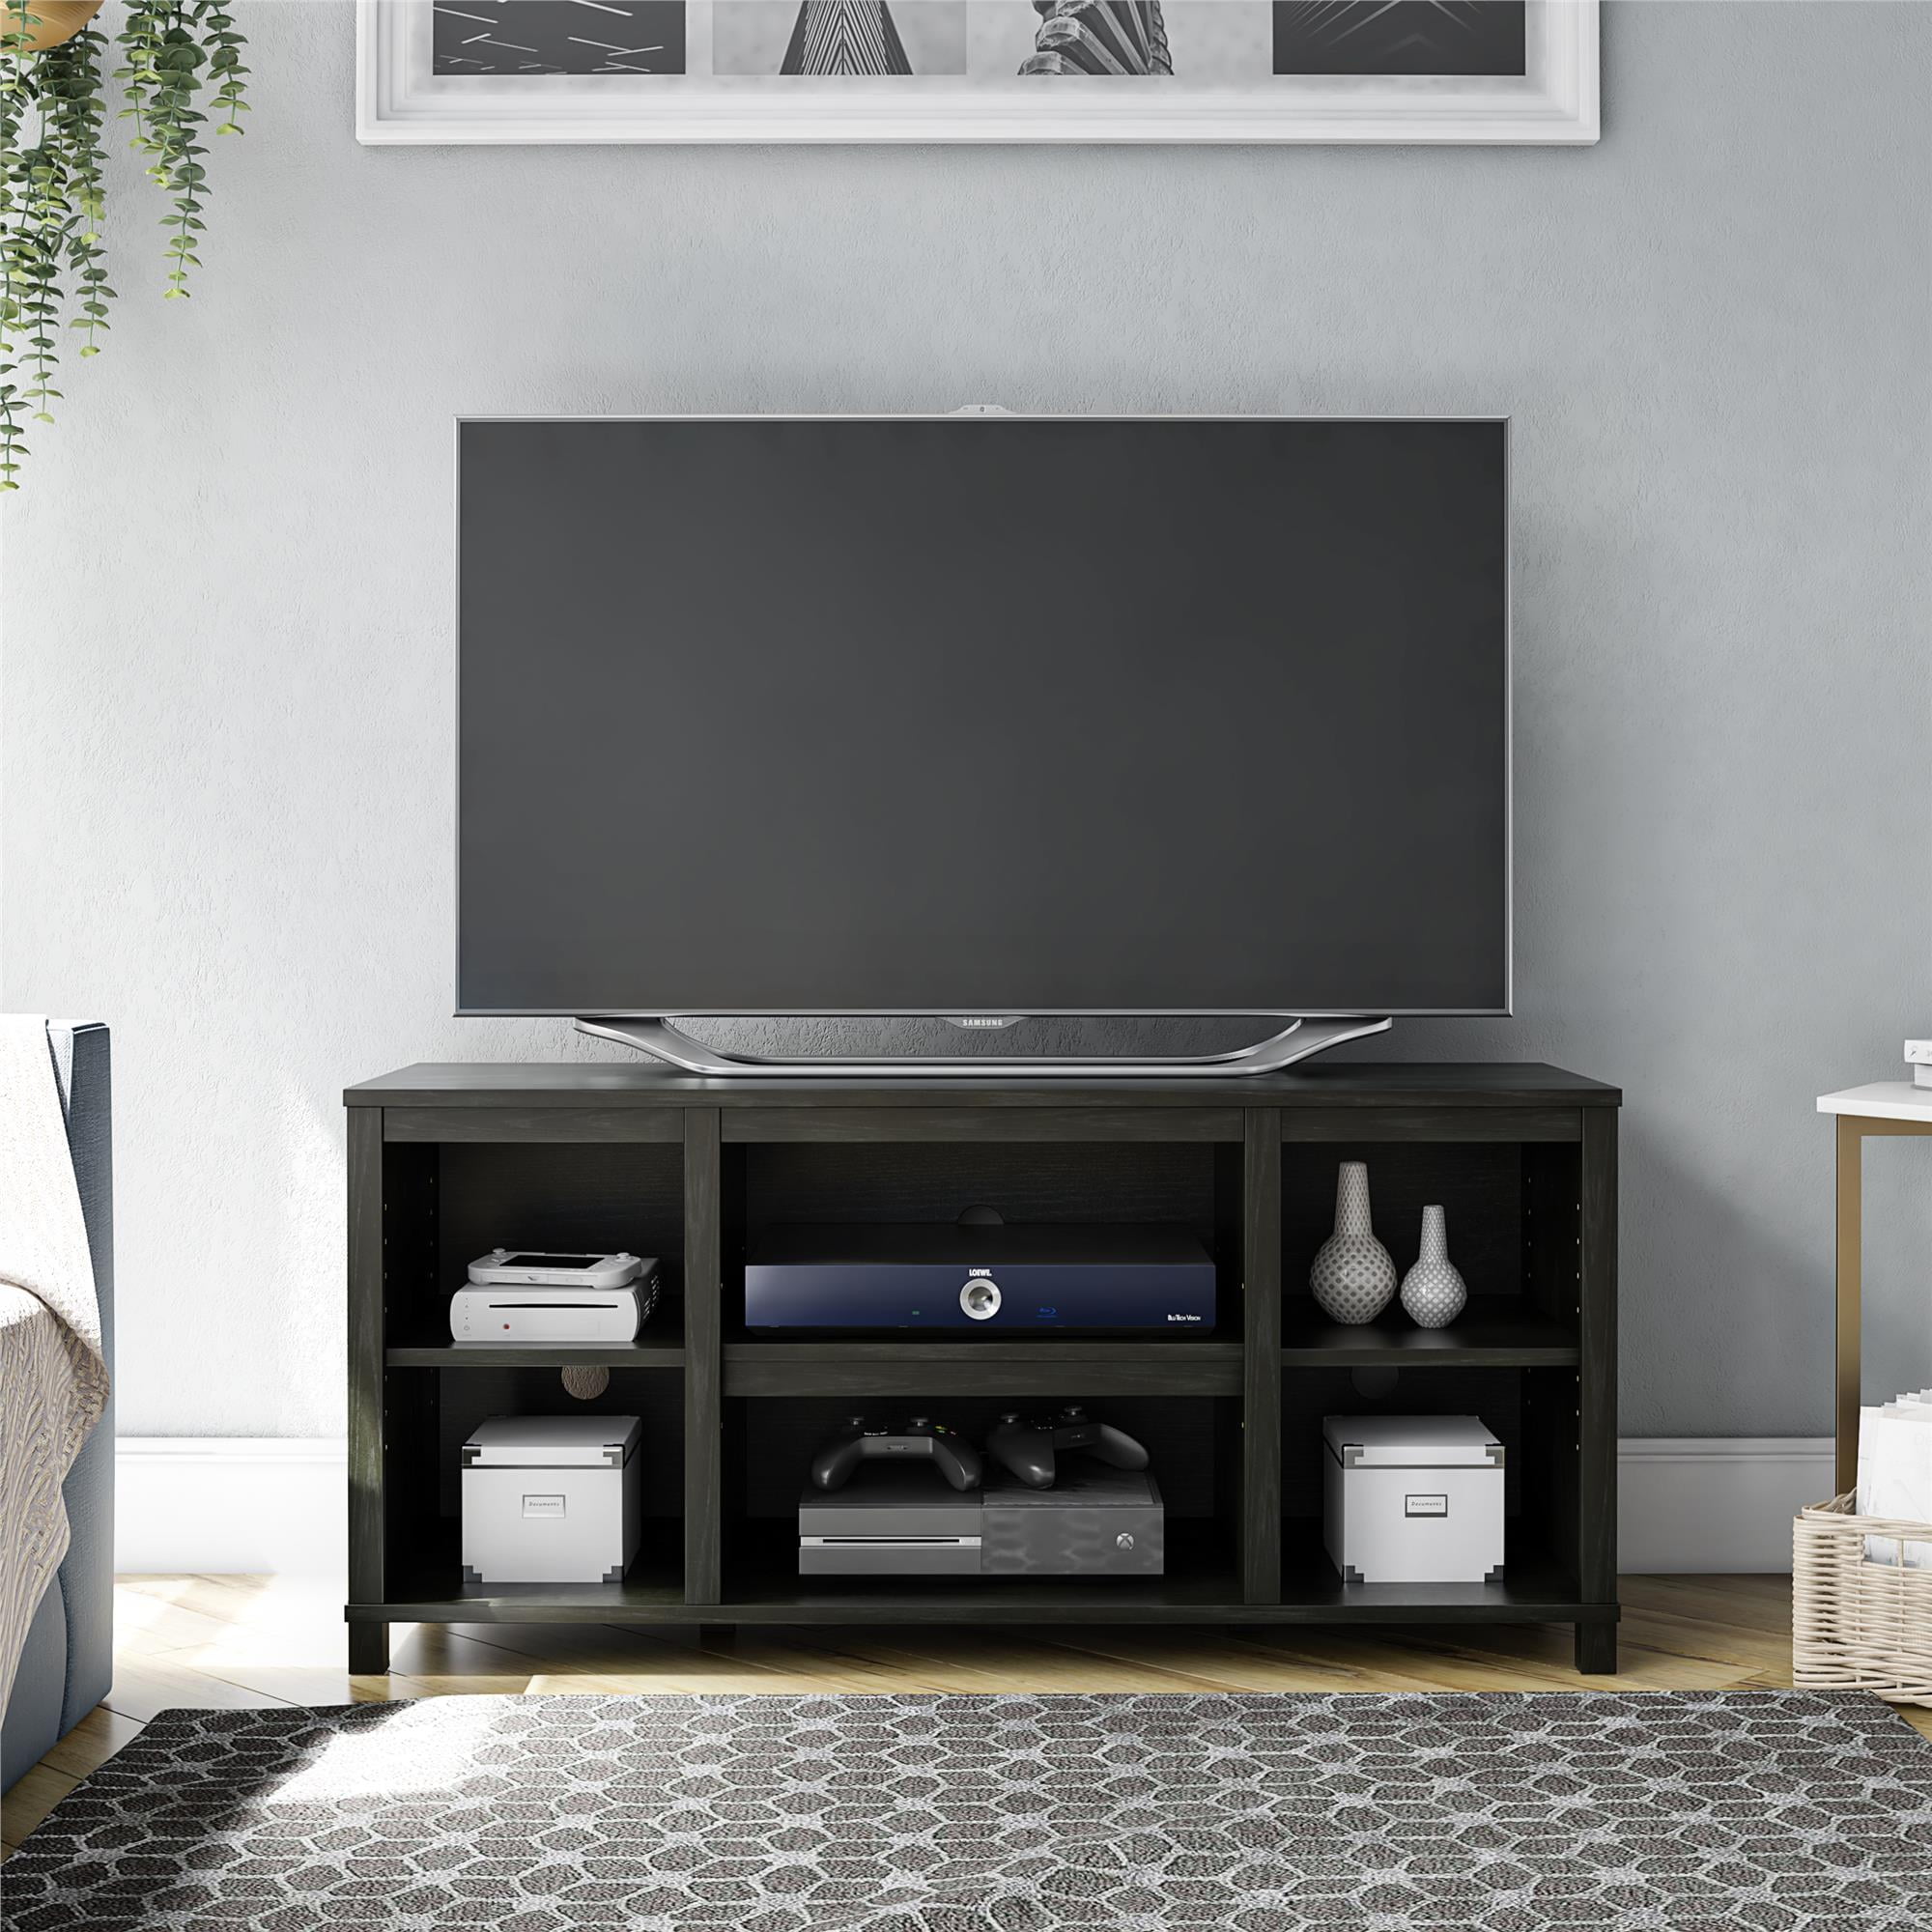 Espresso Mainstay Parsons TV Stand for TVs up to 50 